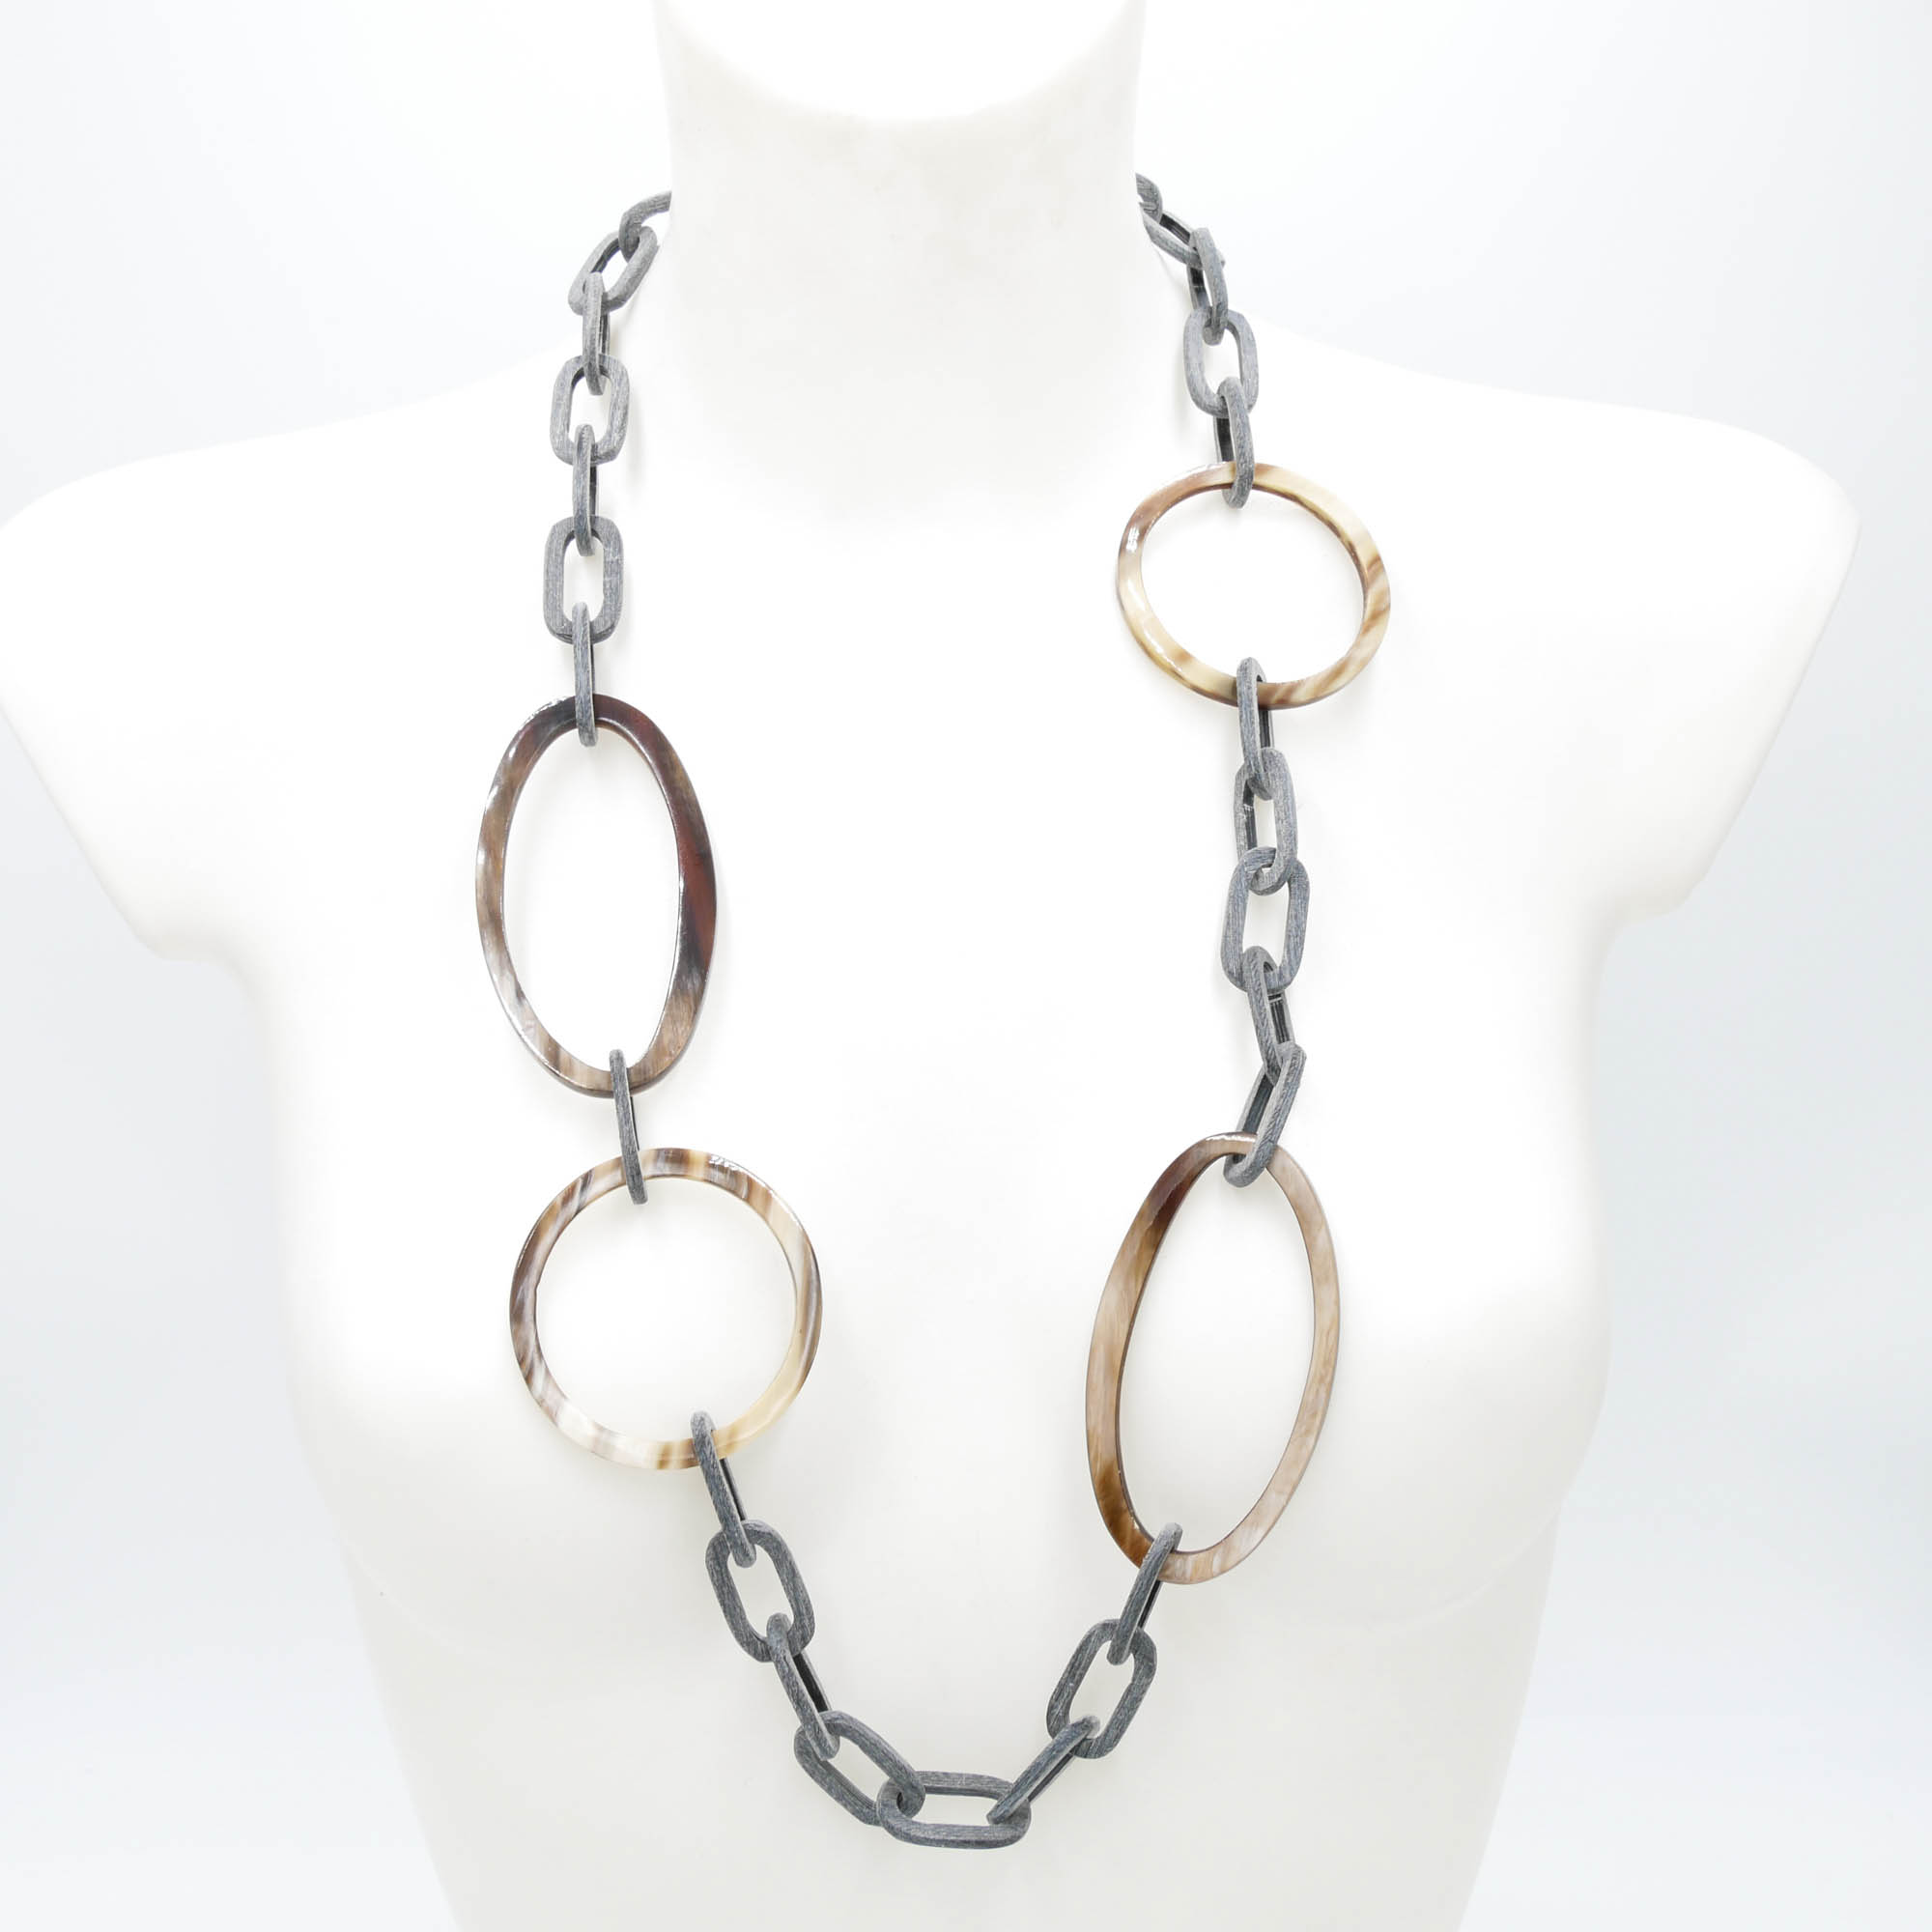 "Art Craft", Horn necklace, long with small grey horn elements and big brown geometric horn elements